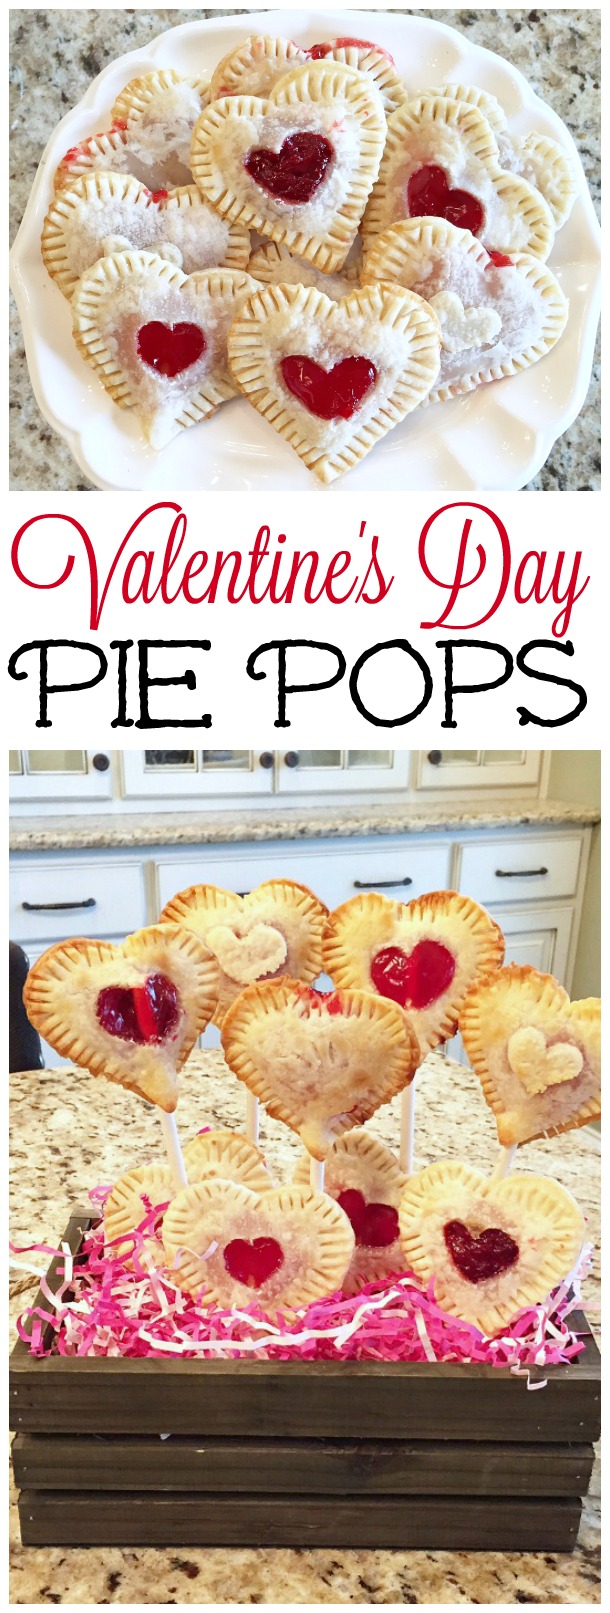 Cute Valentine's Day pie pops - easy to make with only three ingredients needed!